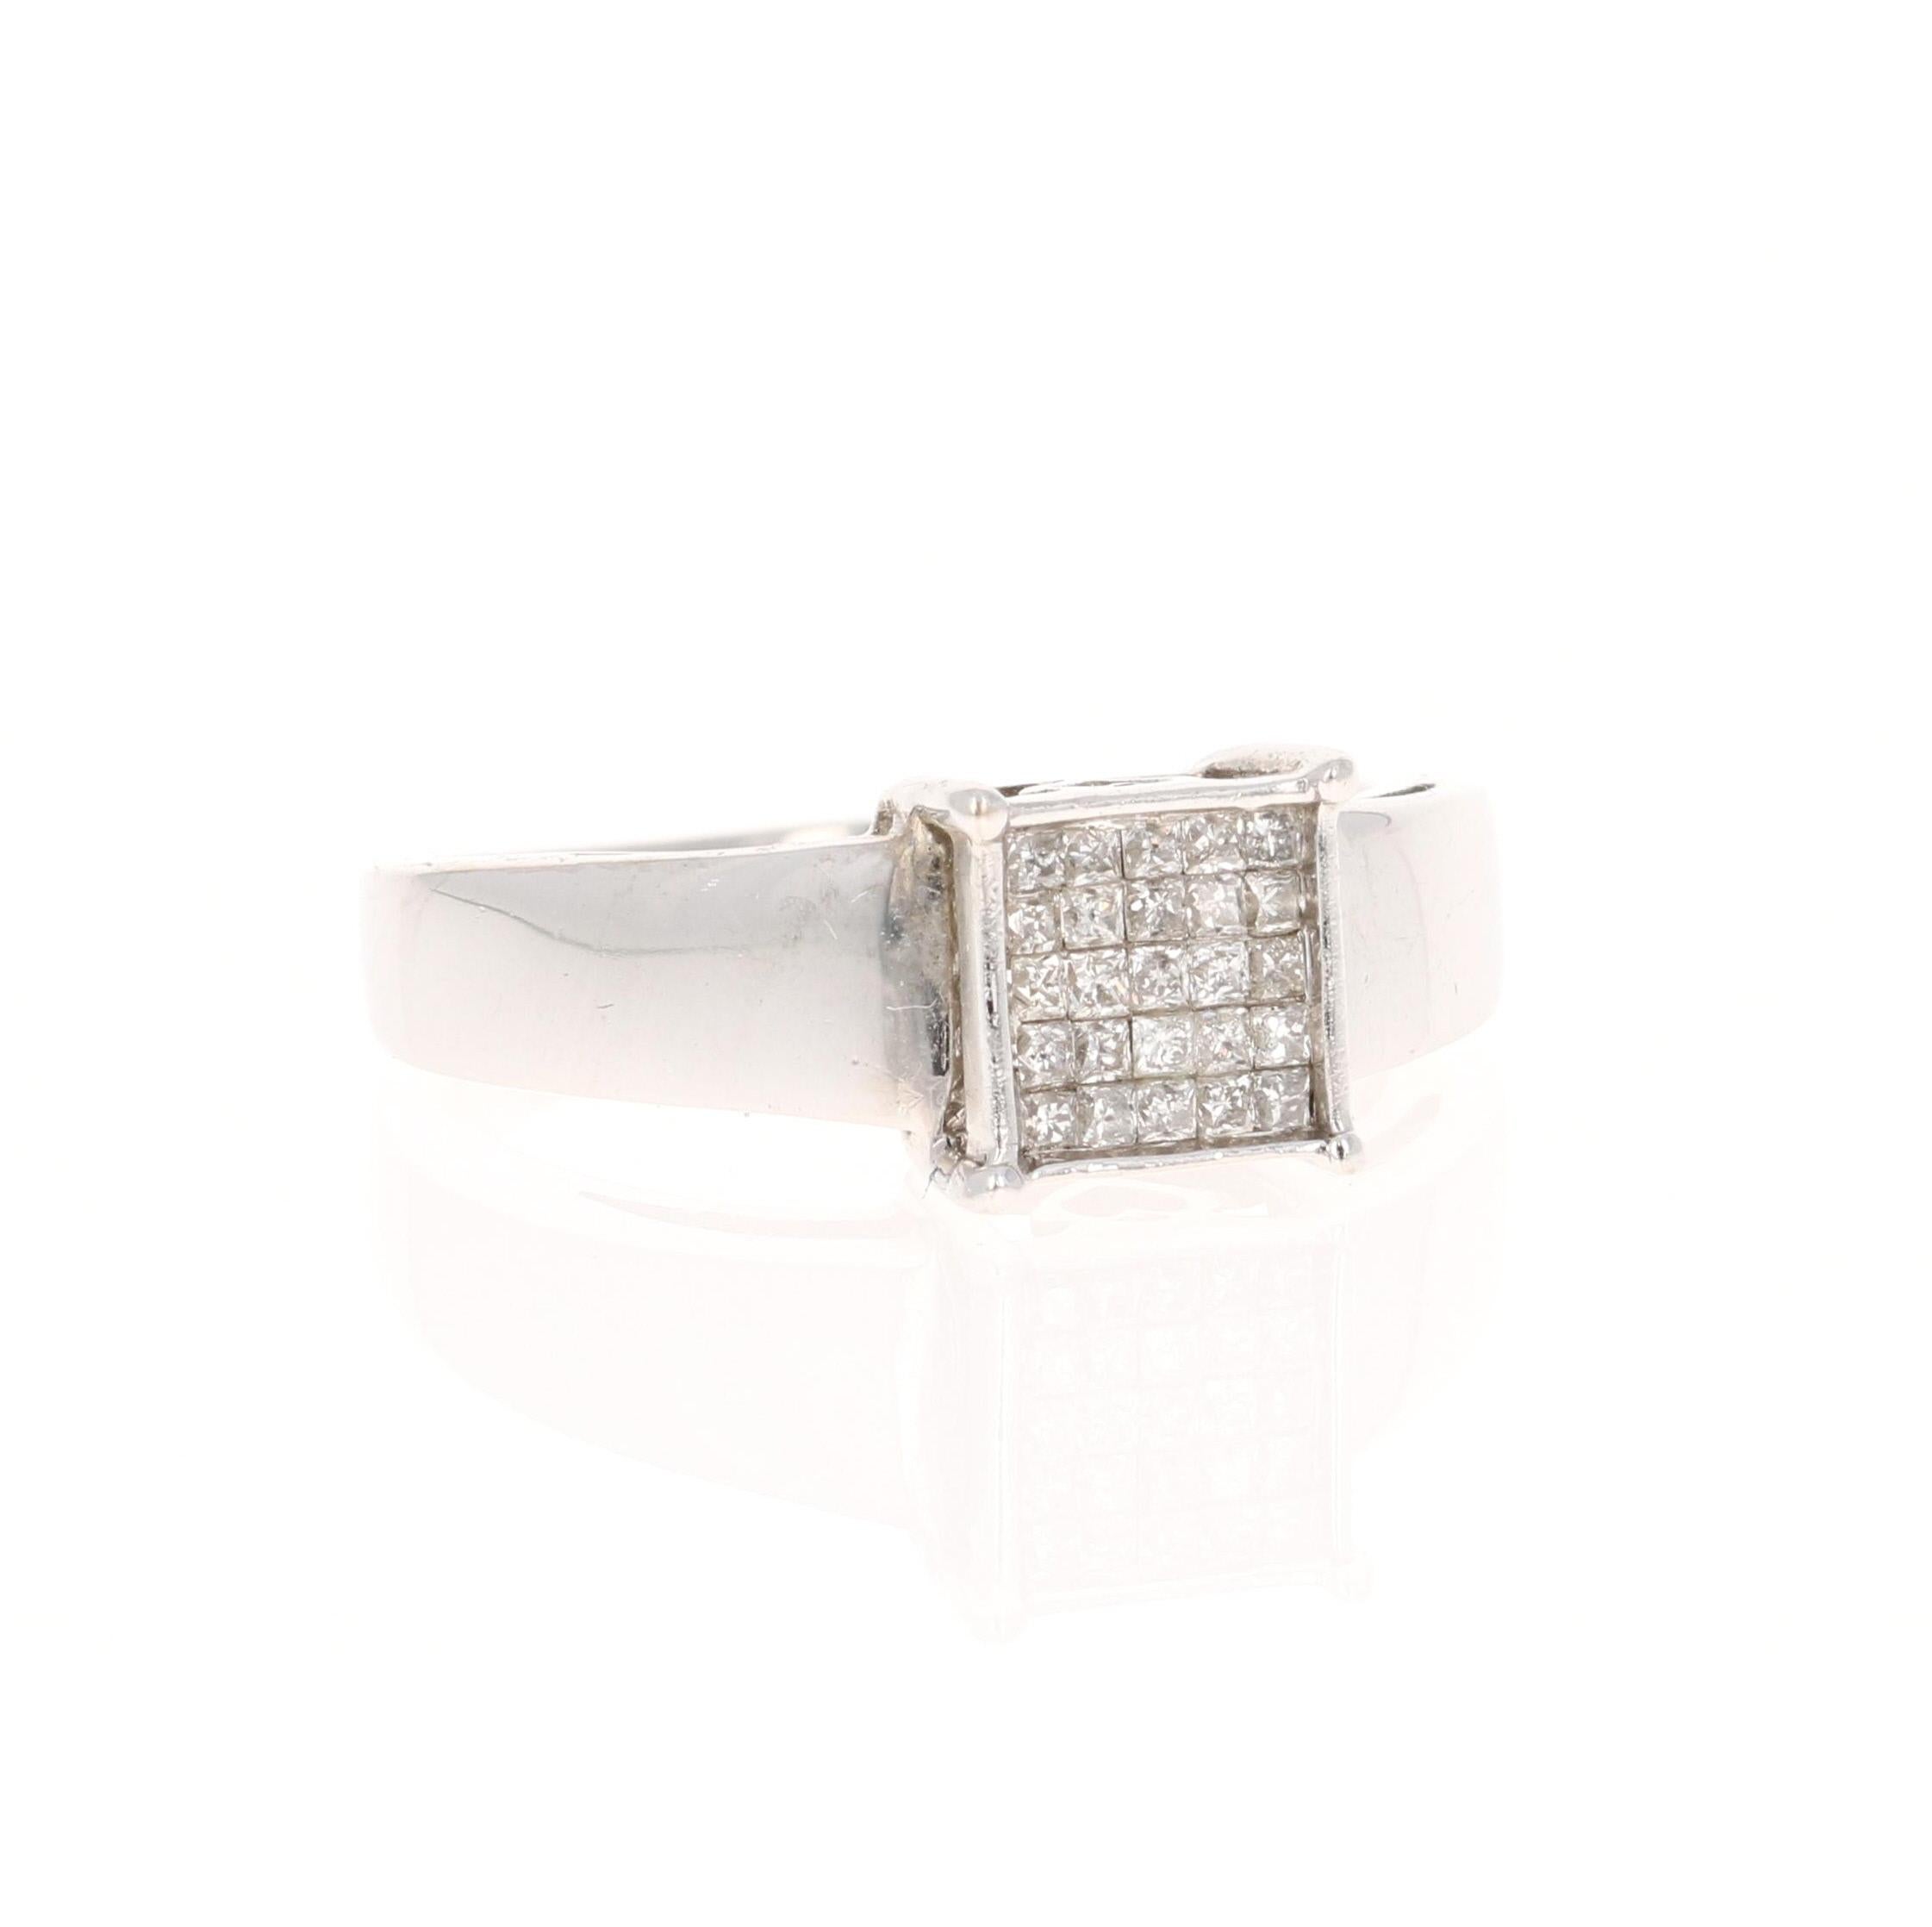 This ring has 25 Princess cut diamonds that weigh 0.50 carats. 
It is made in 14 Karat White Gold and weighs approximately 3.9 grams. 

The ring is a size 7 and can be re-sized at no additional charge. 